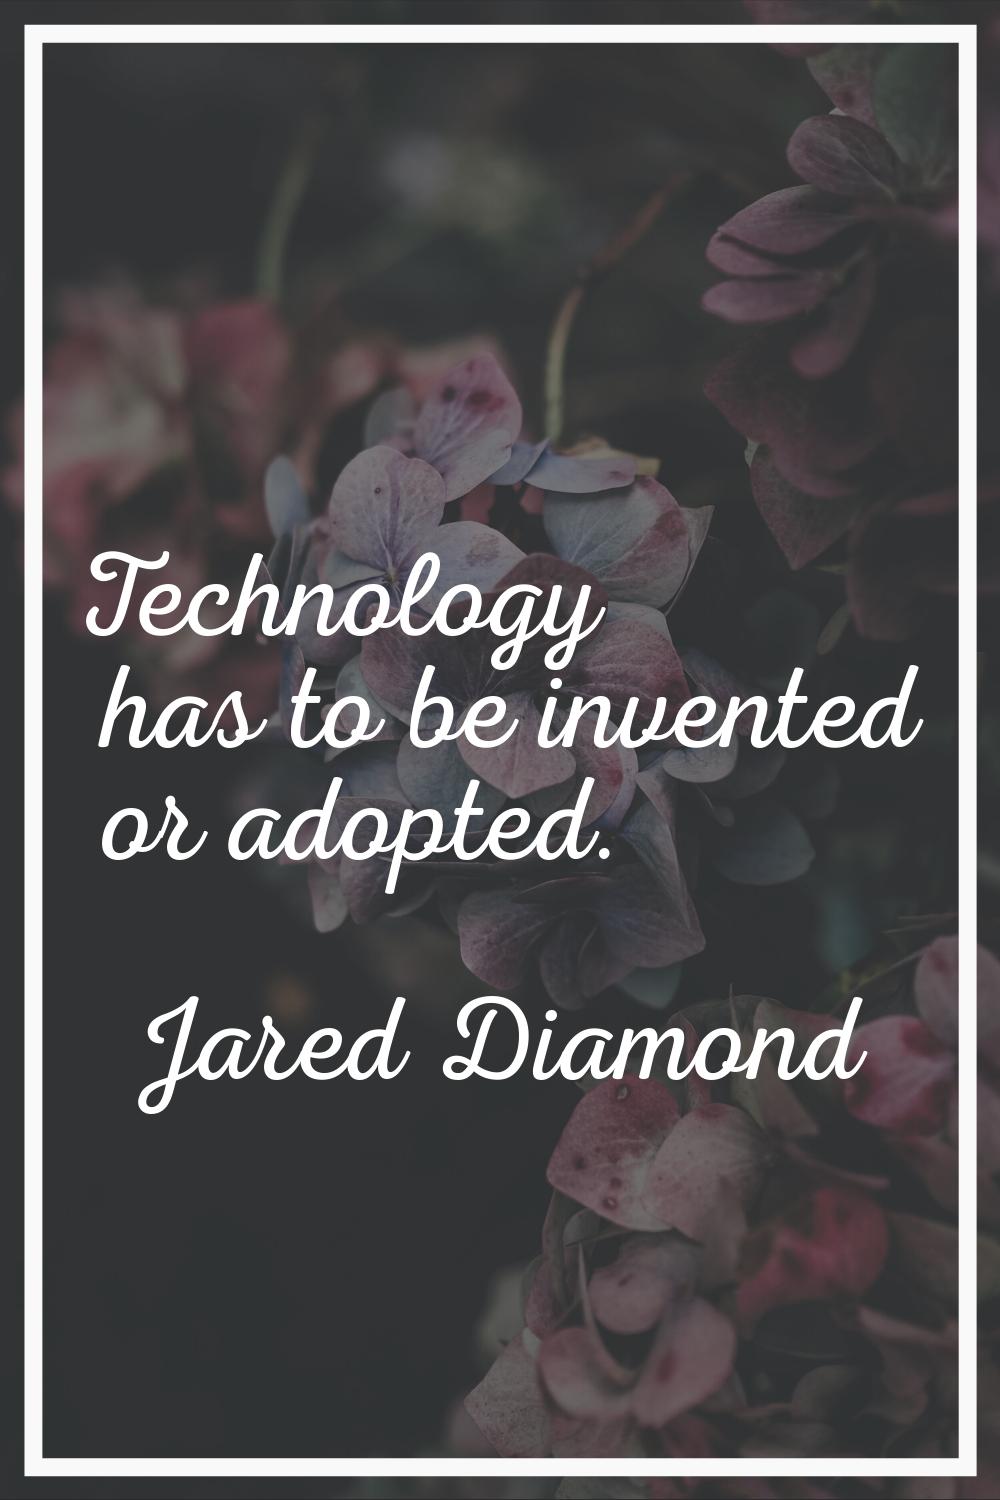 Technology has to be invented or adopted.